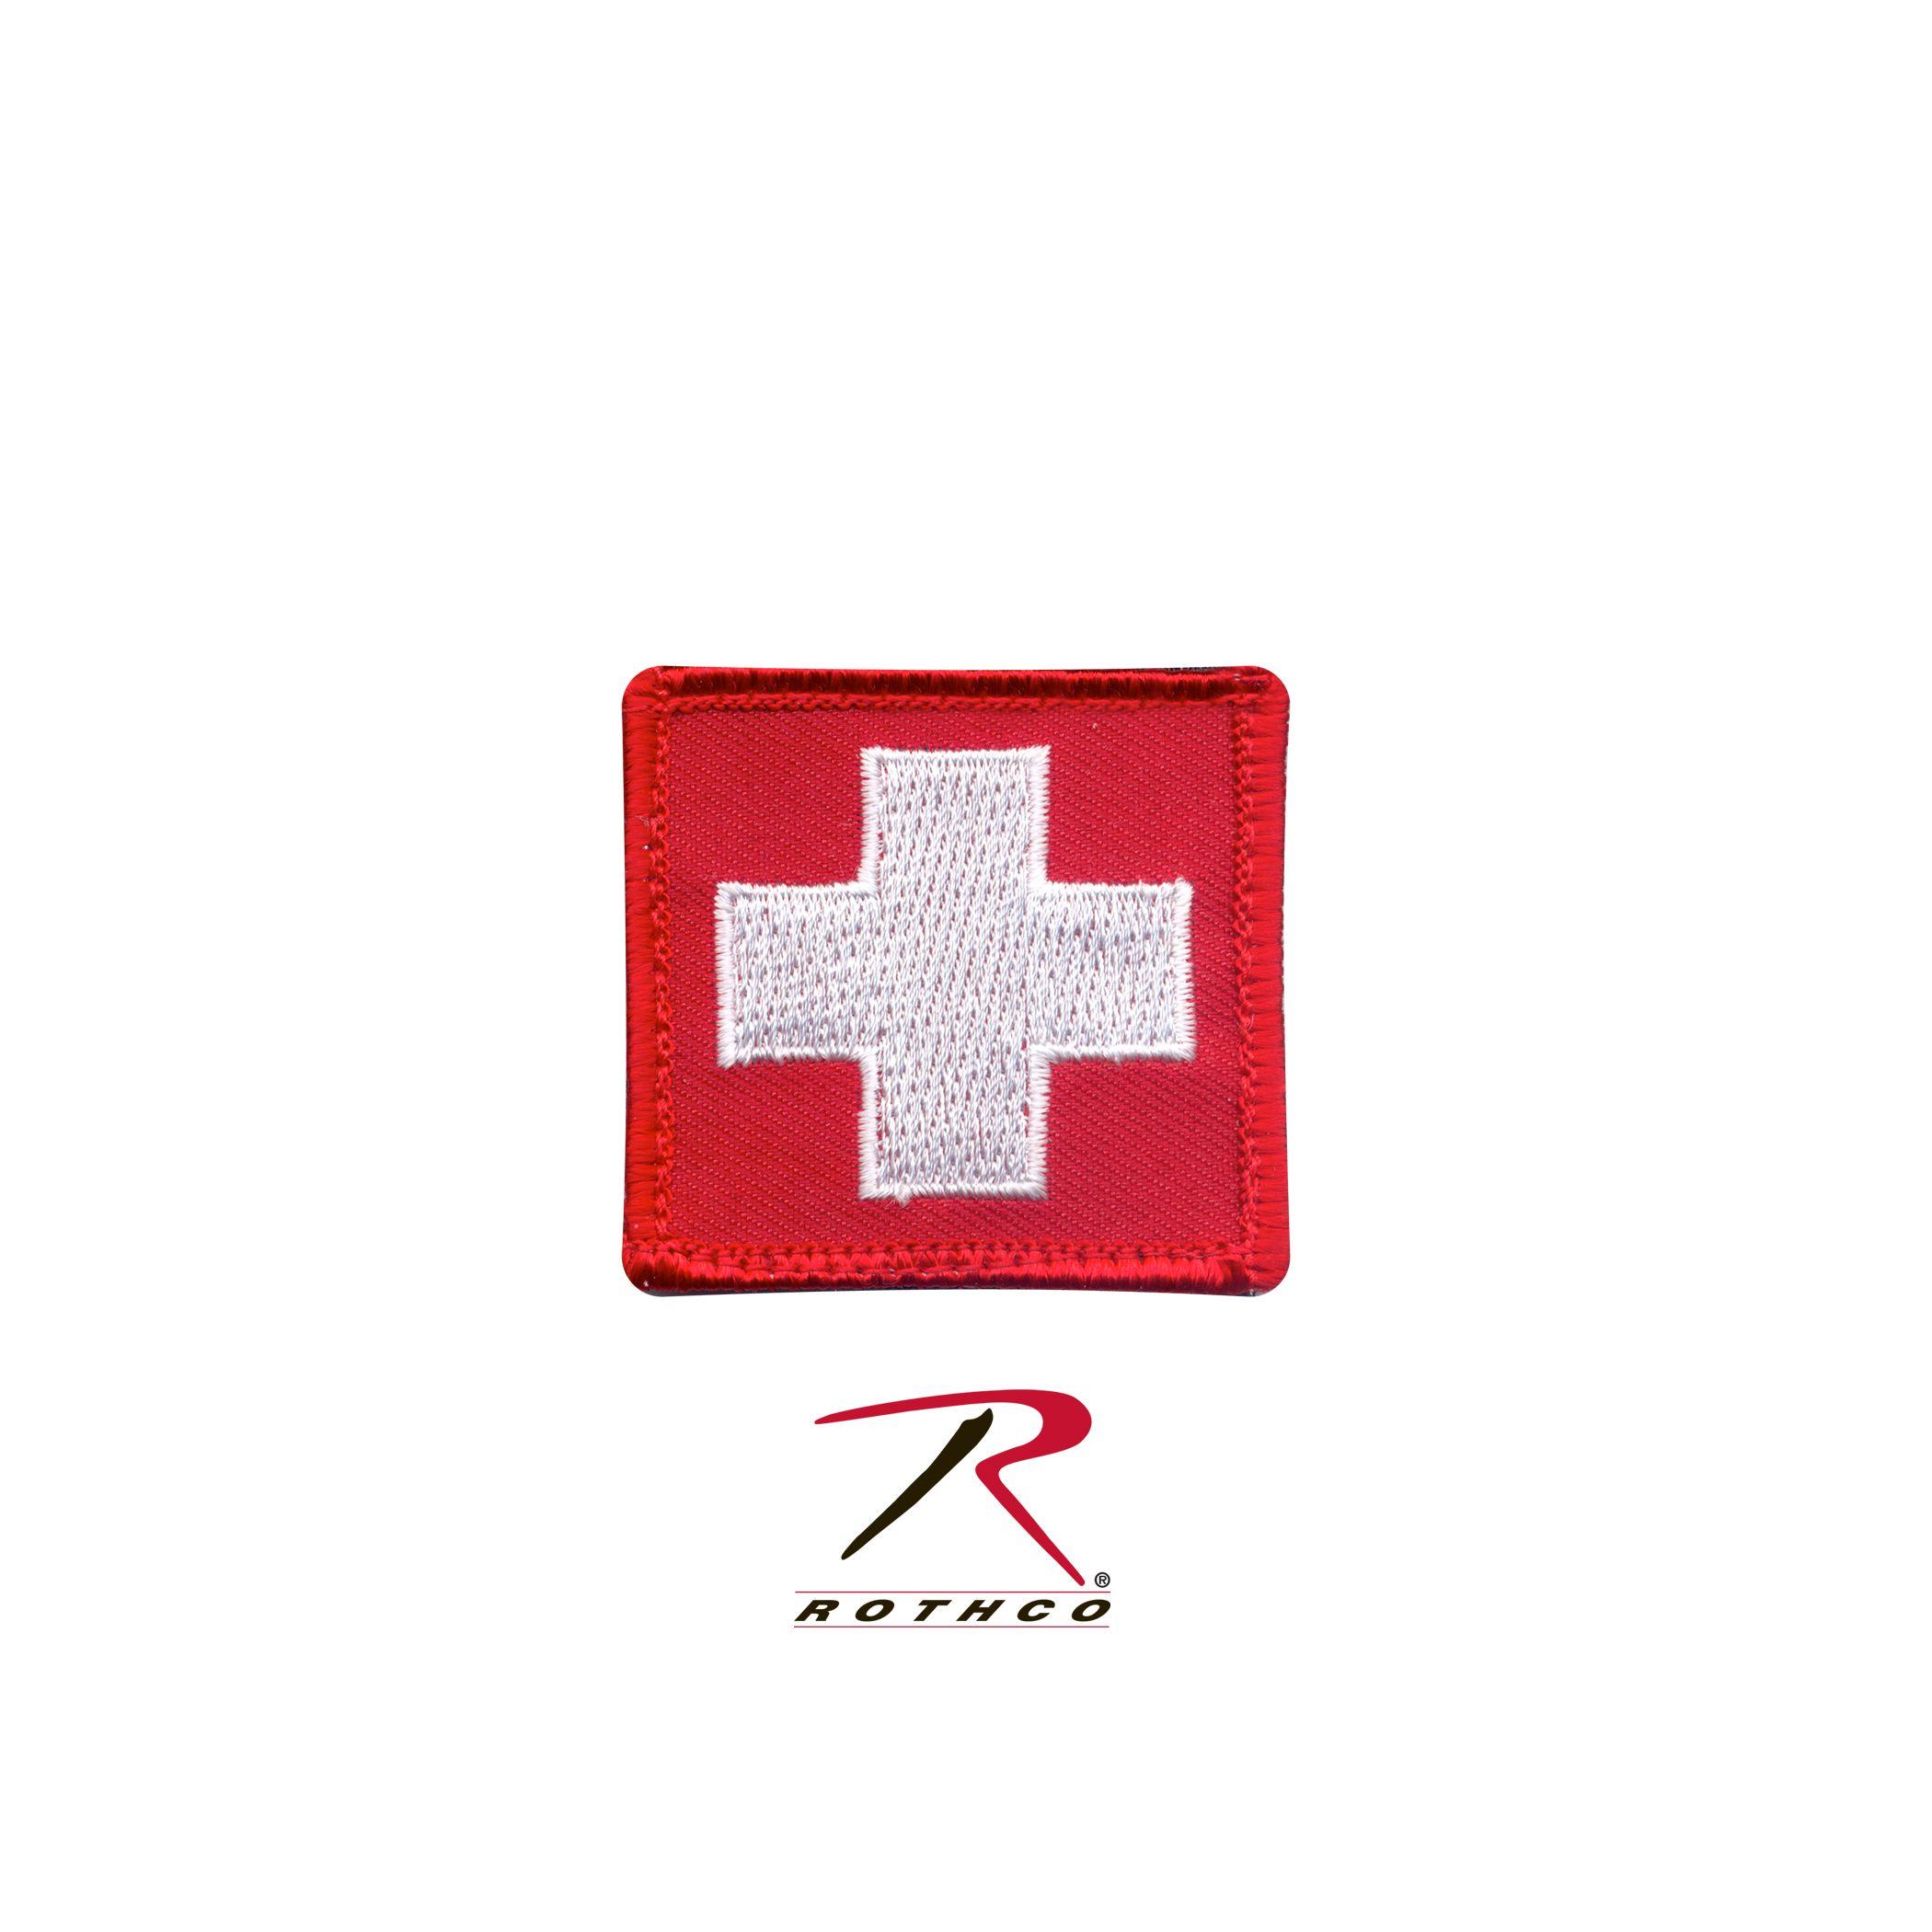 Square White with Red Cross Brand Logo - Red square white cross Logos